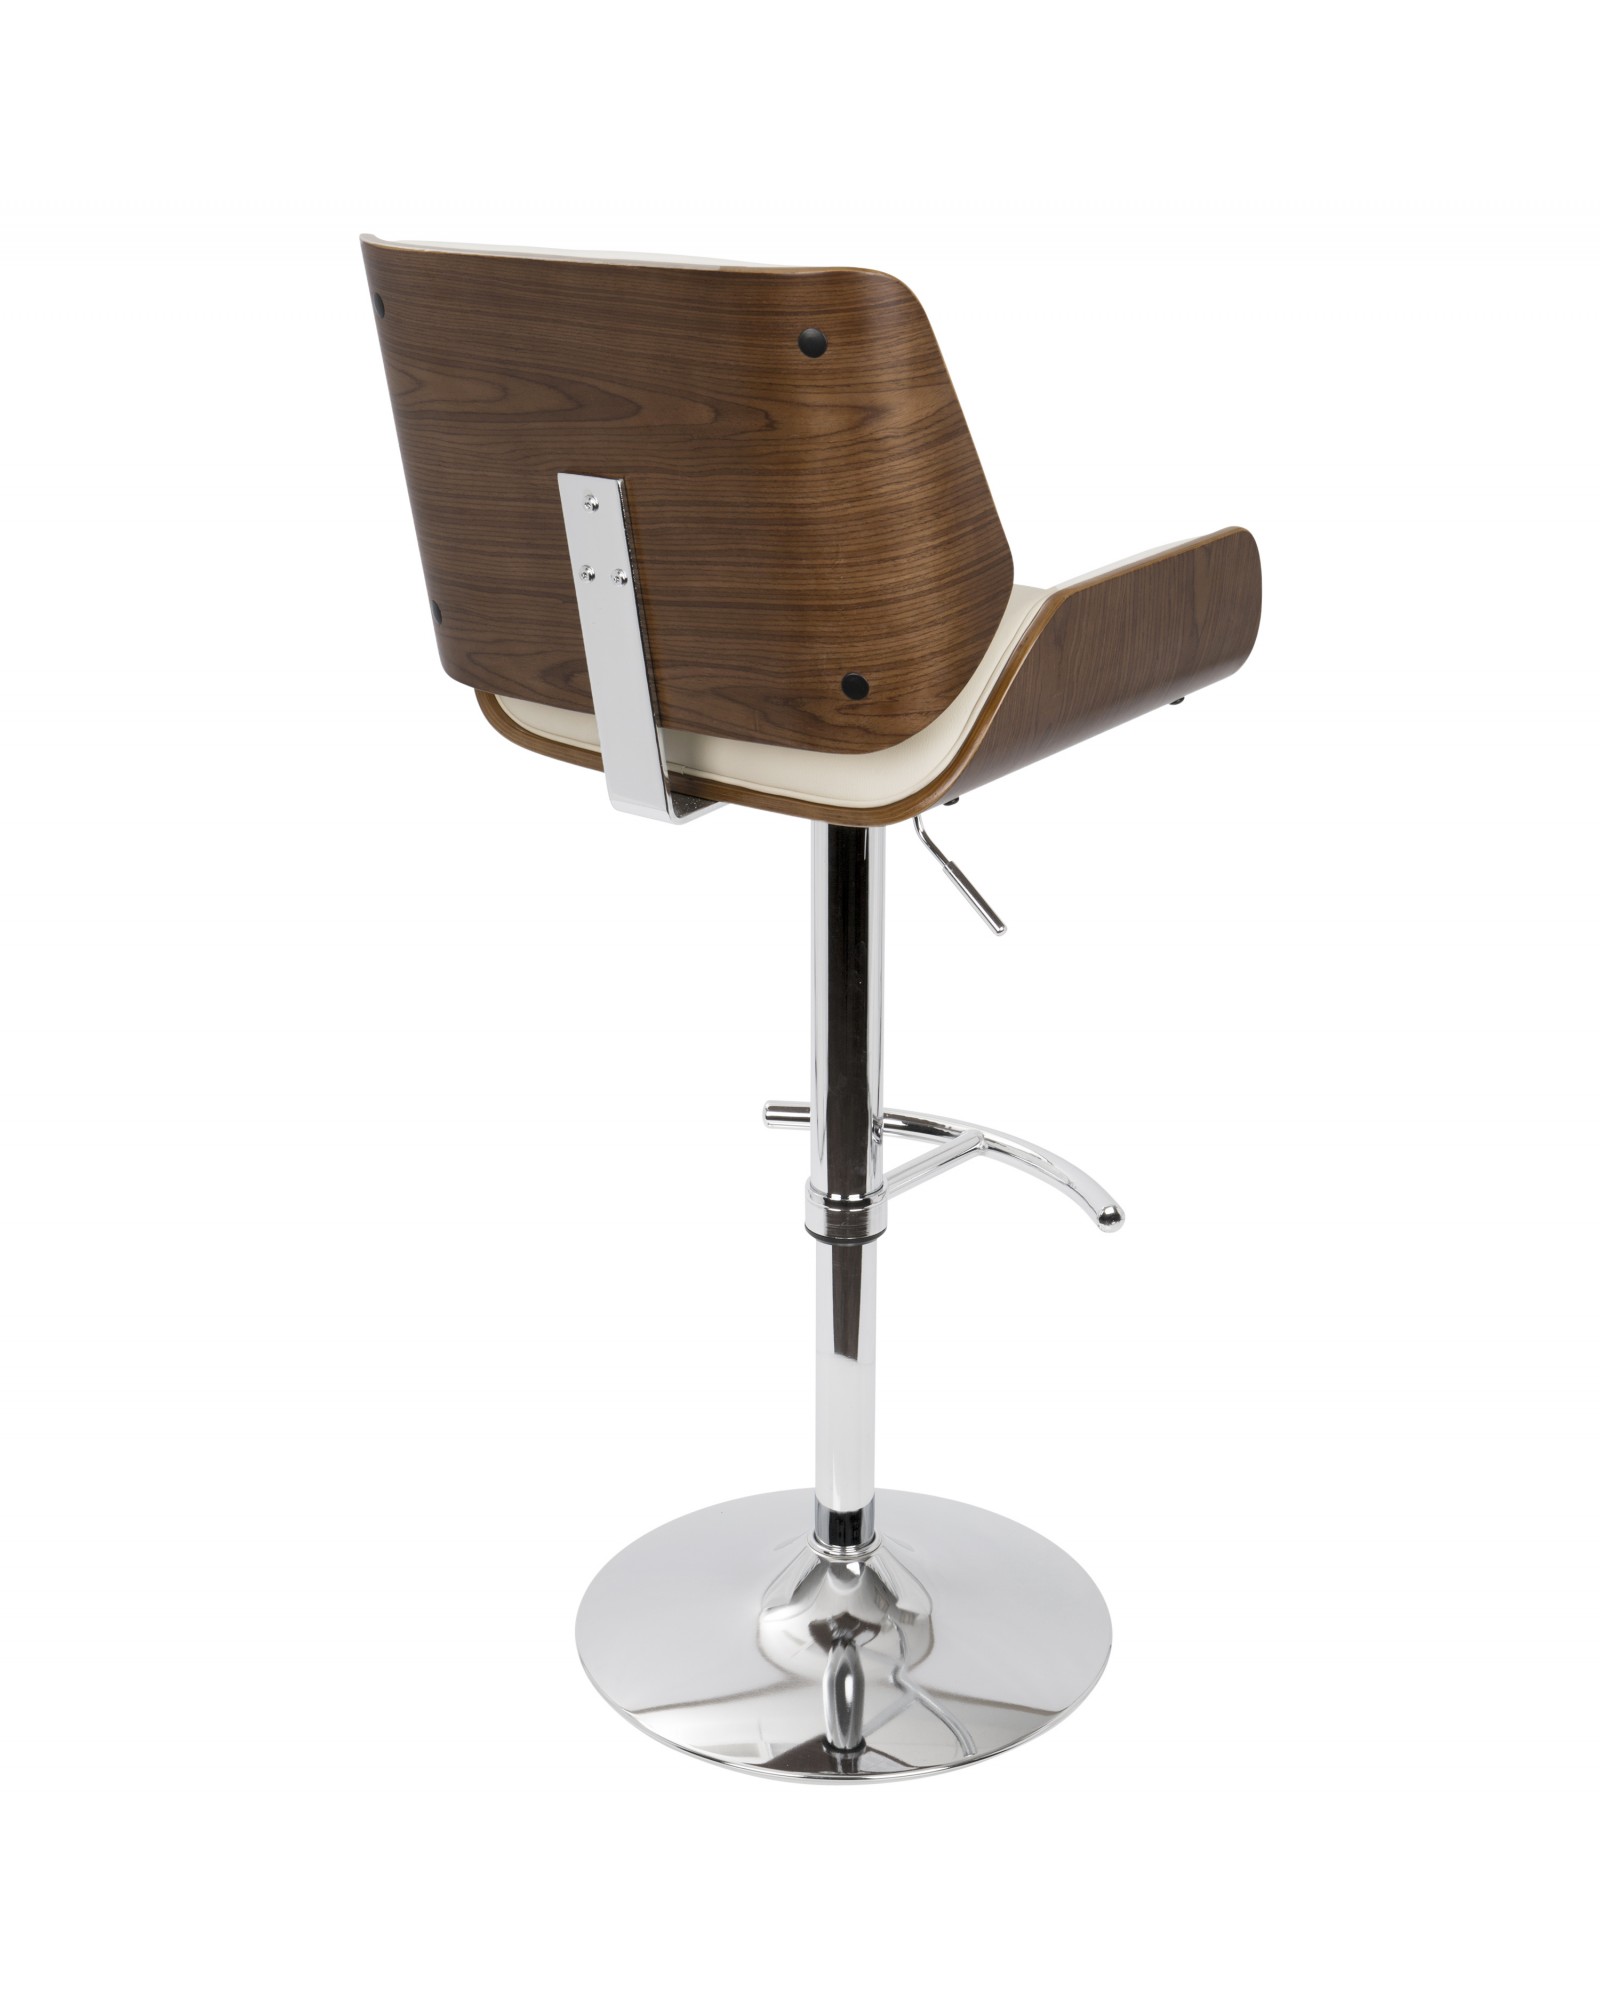 Santi Mid-Century Modern Adjustable Barstool with Swivel in Walnut and Cream Faux Leather